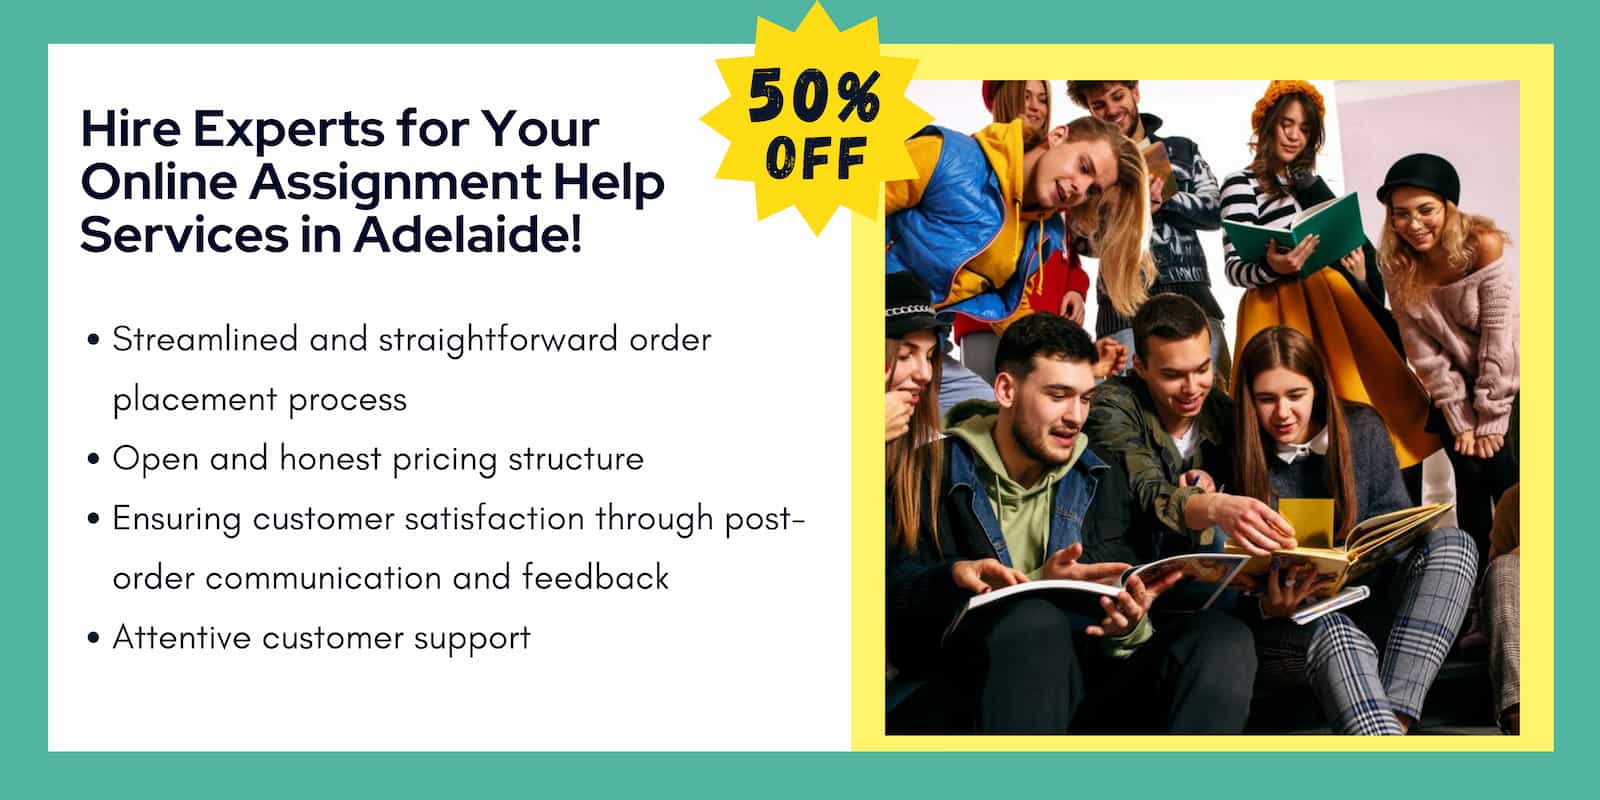 assignment help in adelaide